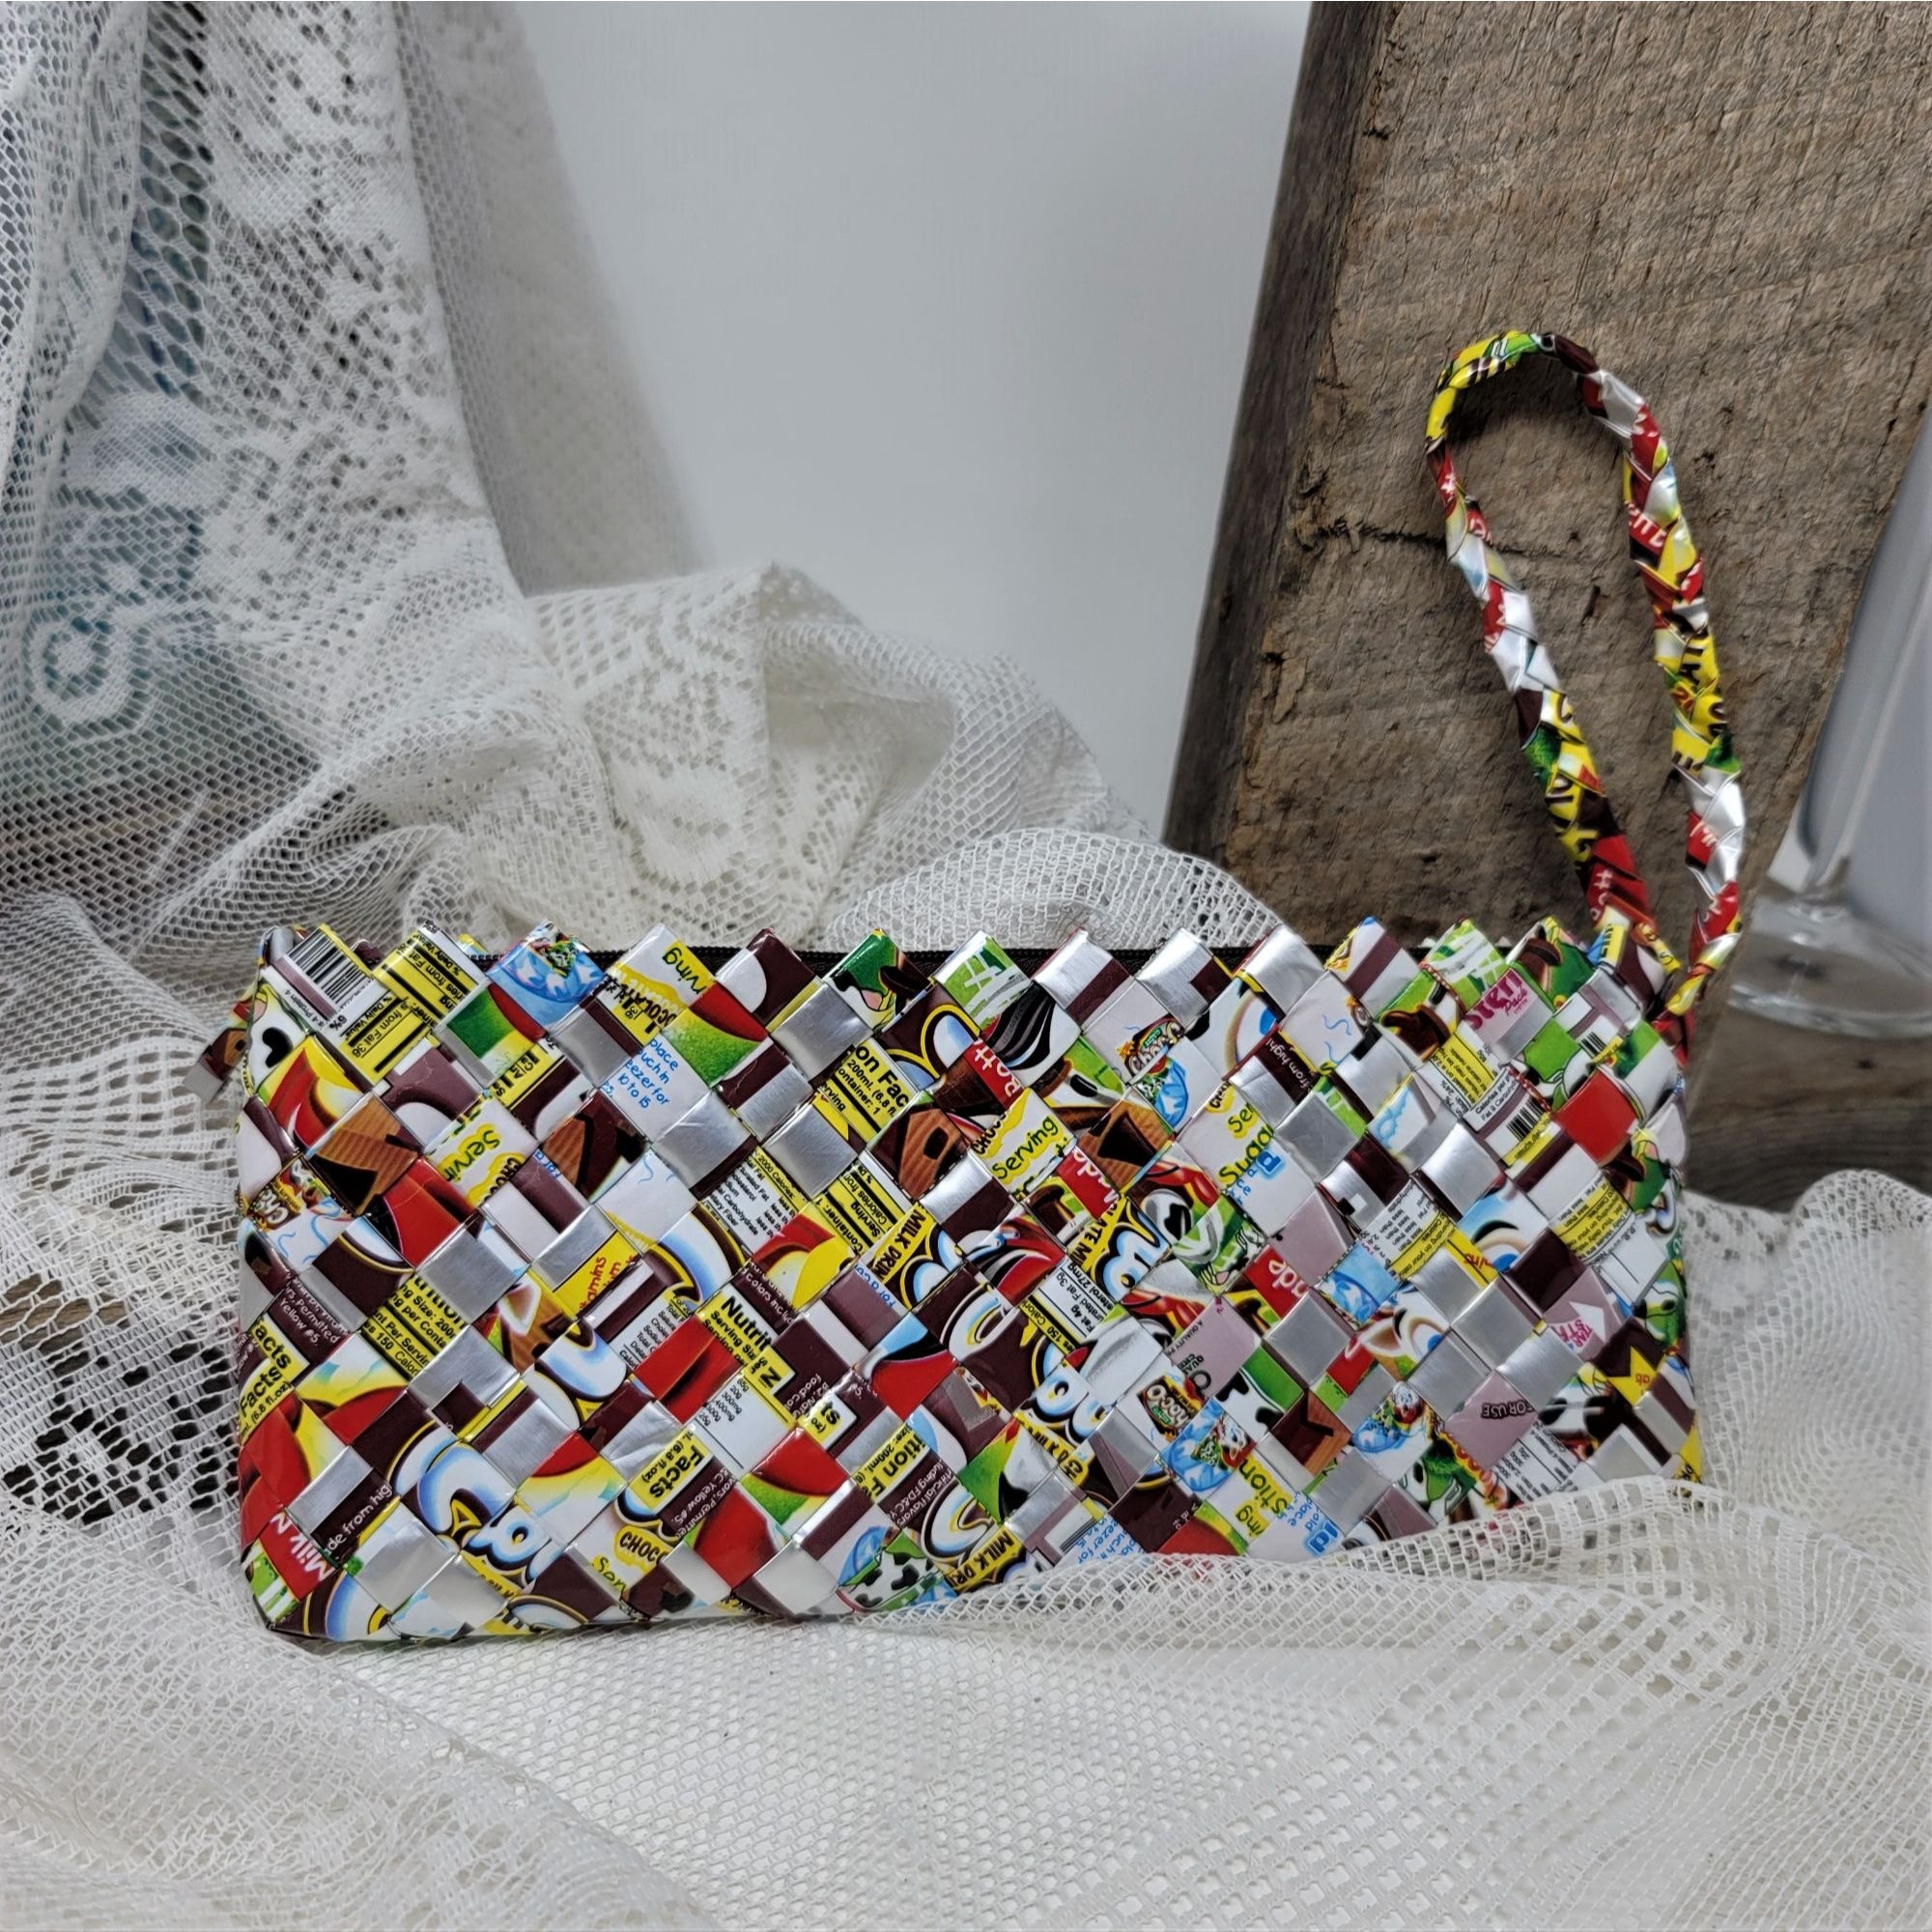 Purse Made Out Of Candy Wrappers | 3d-mon.com